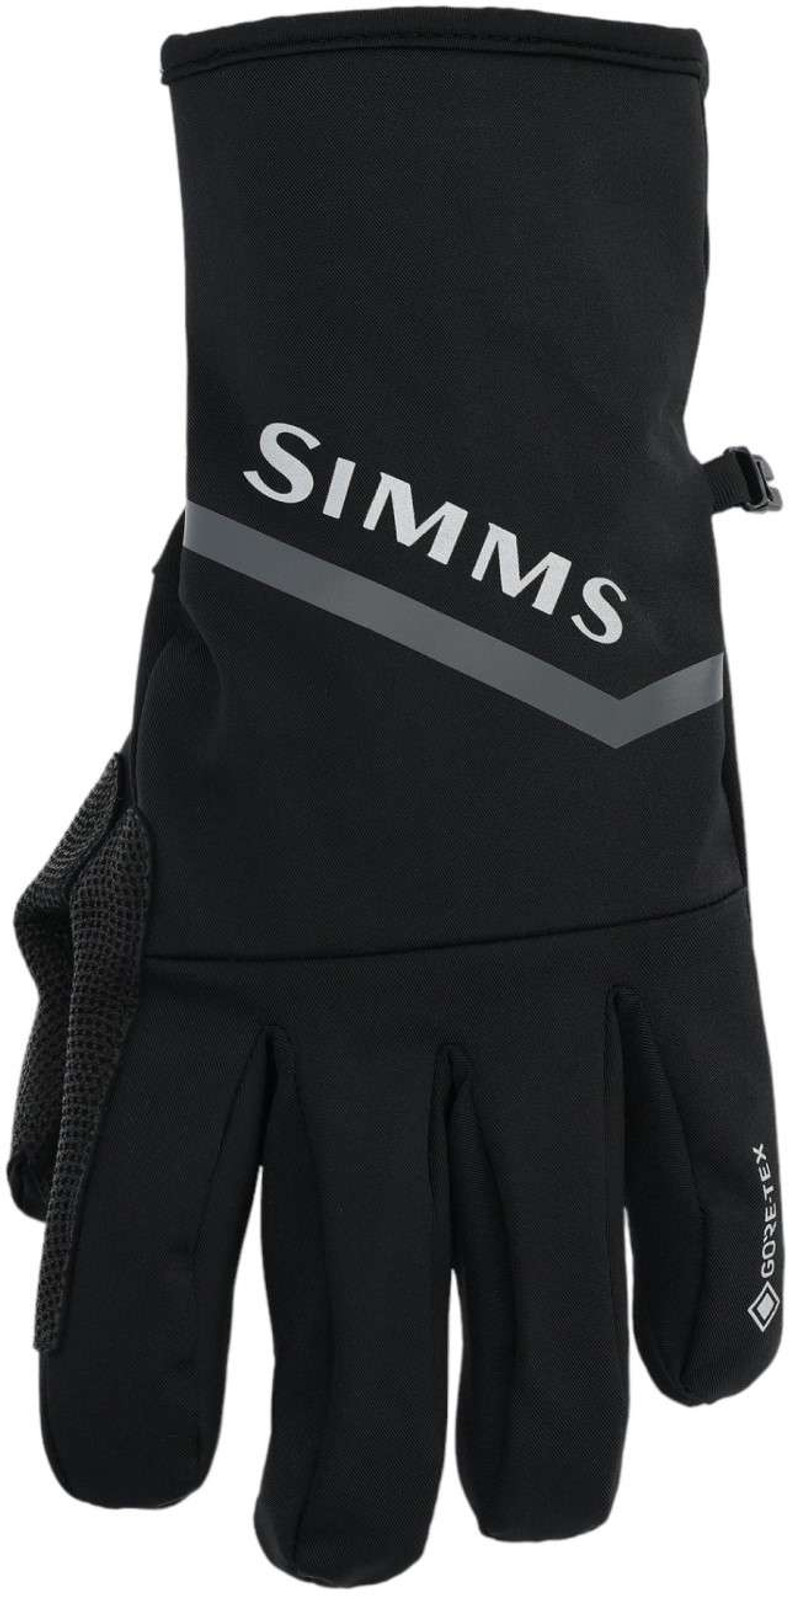 Simms ProDry GORE-TEX Fishing Glove and Liner - TackleDirect